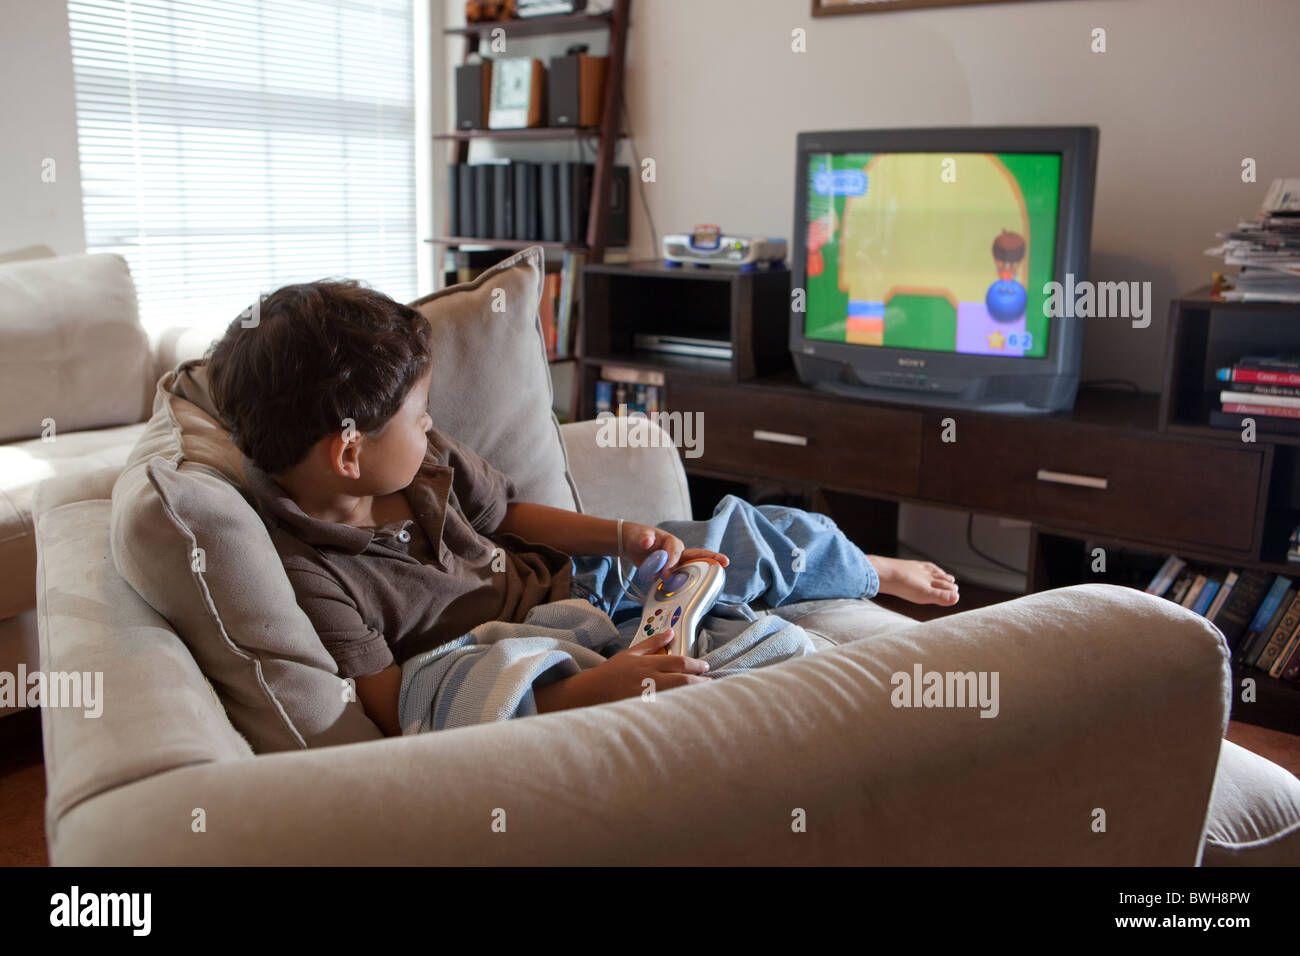 Four-year-old Mexican-American boy uses VTech V.Smile motion active  learning console to play video game on TV screen in his den Stock Photo -  Alamy